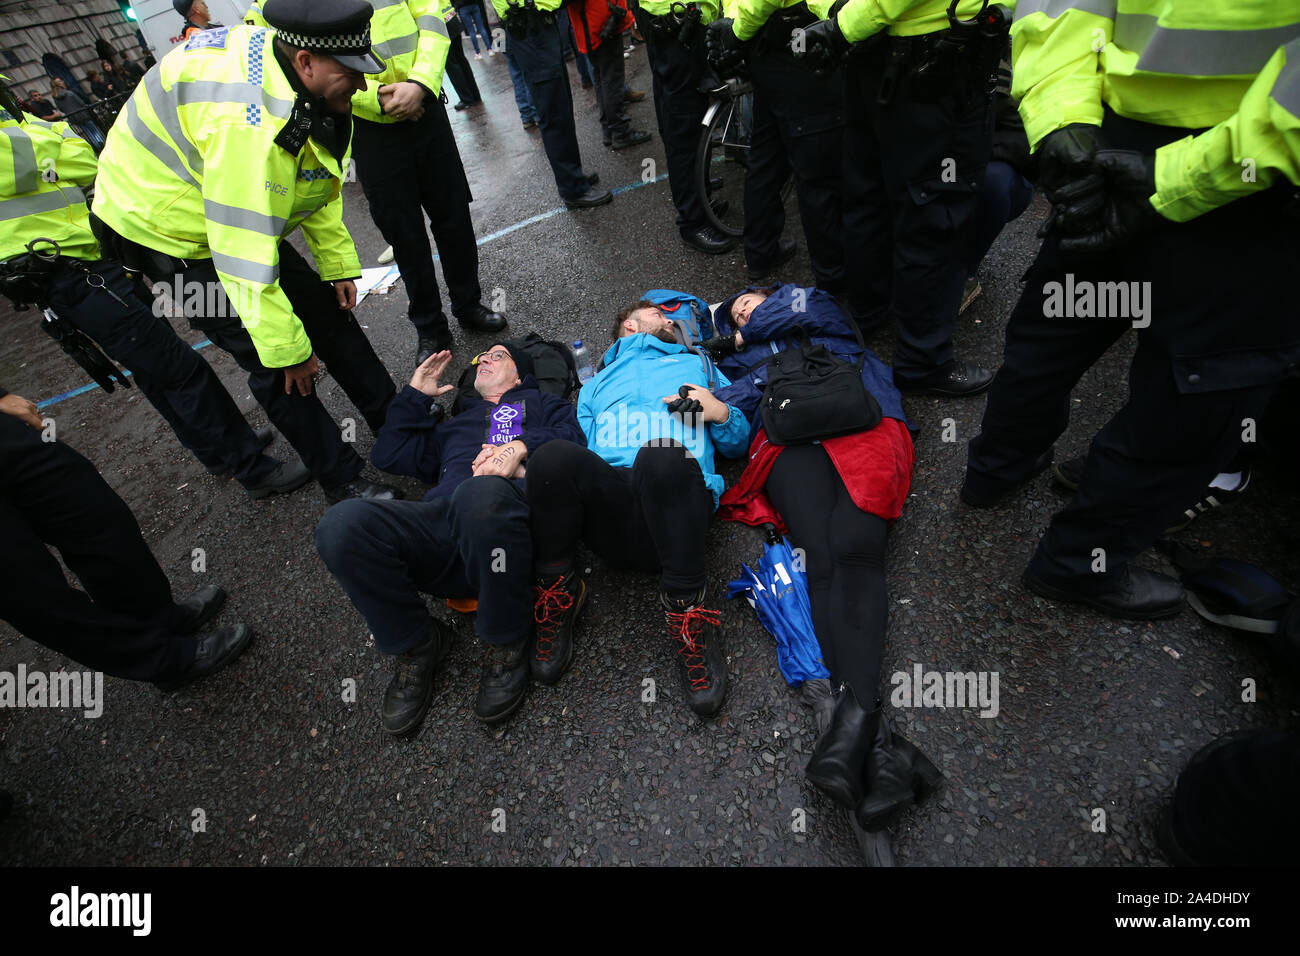 Police talk to protesters blocking the road outside Mansion House in the City of London, during an Extinction Rebellion (XR) climate change protest. Stock Photo